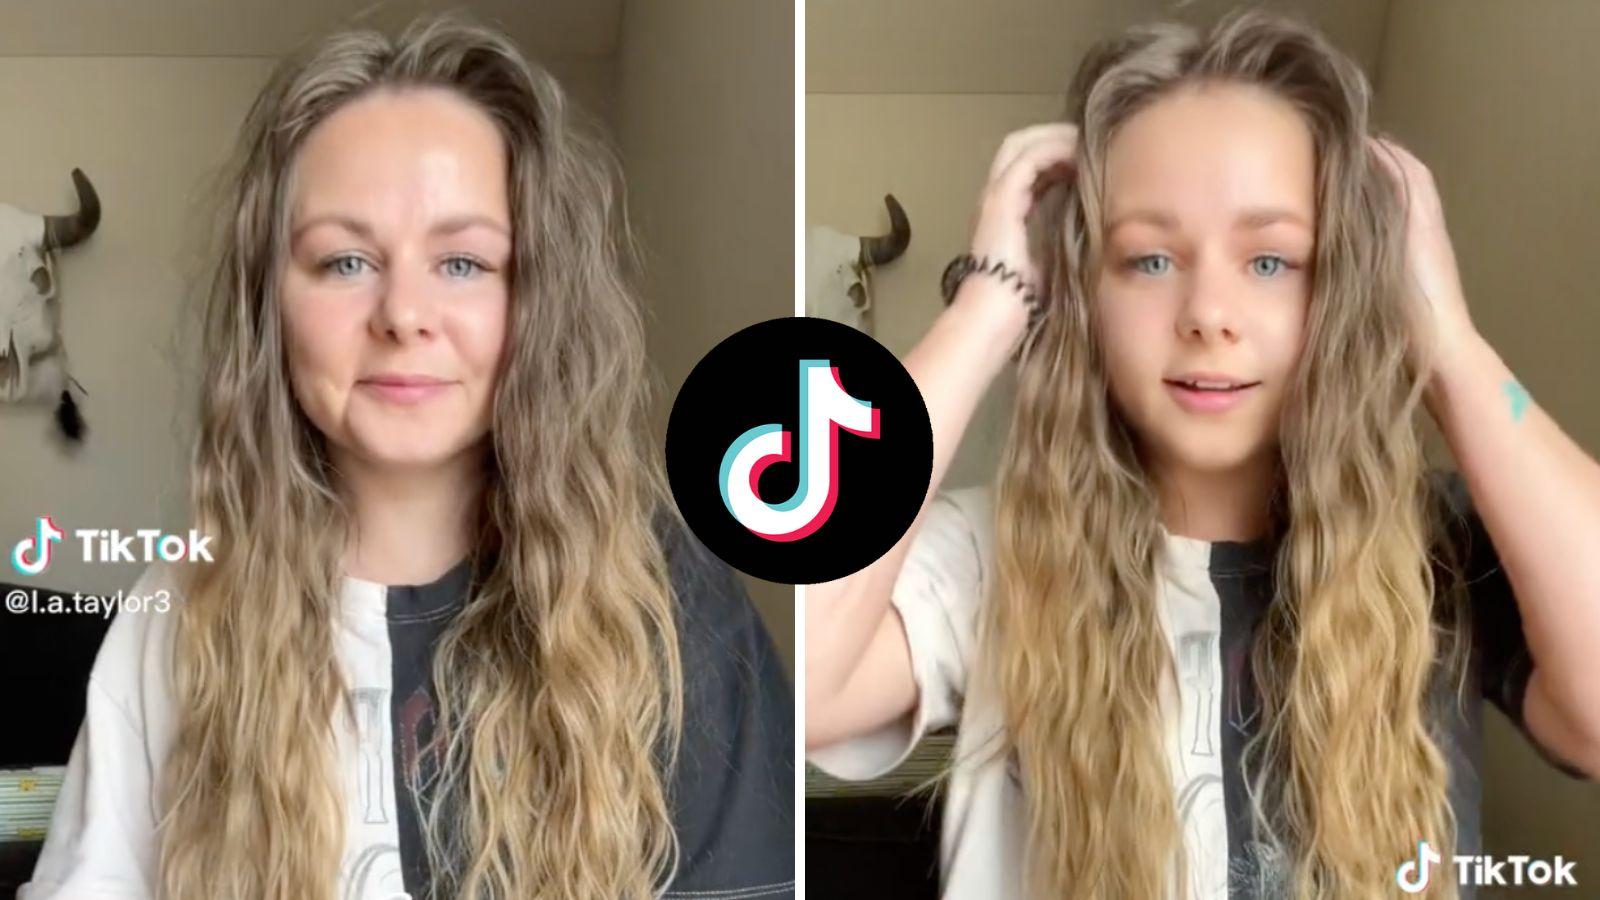 free hair from games｜TikTok Search